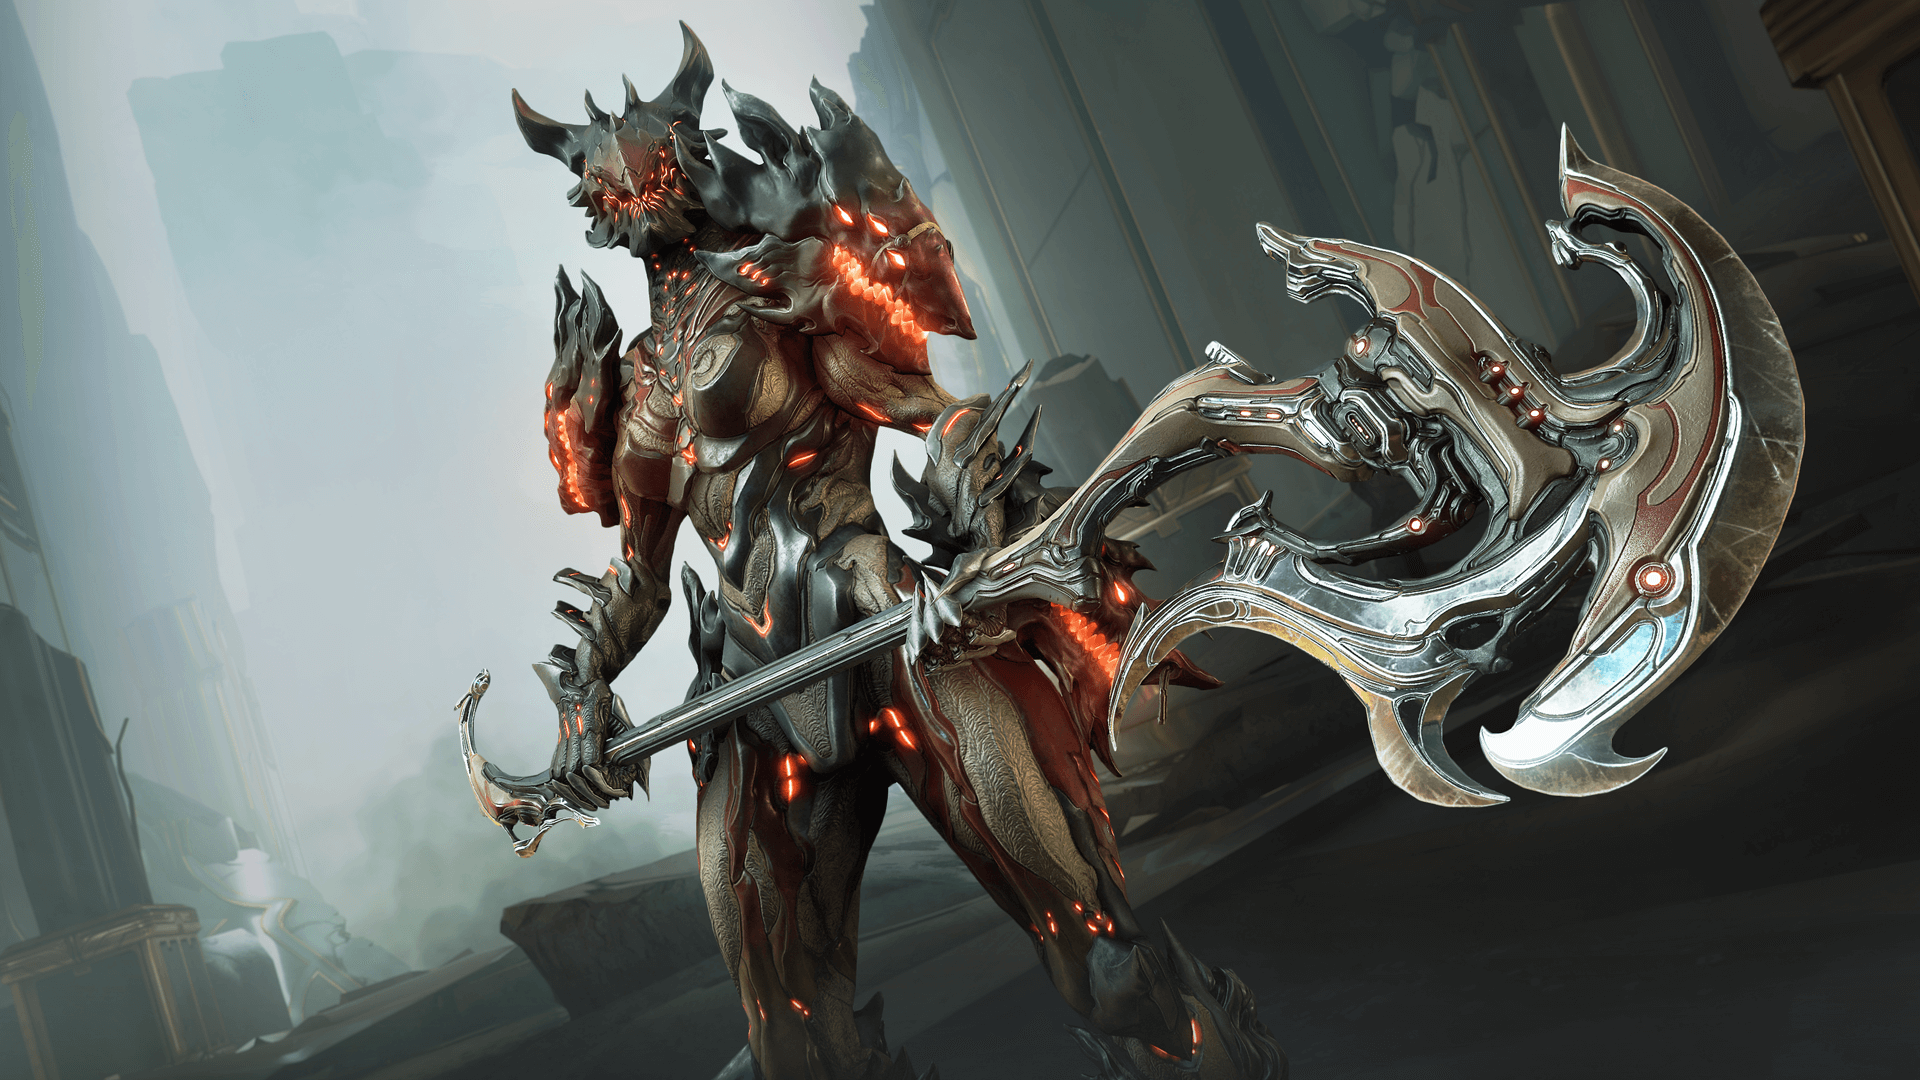 Warframe announces Lua’s Prey update and new Wolf-themed Warframe